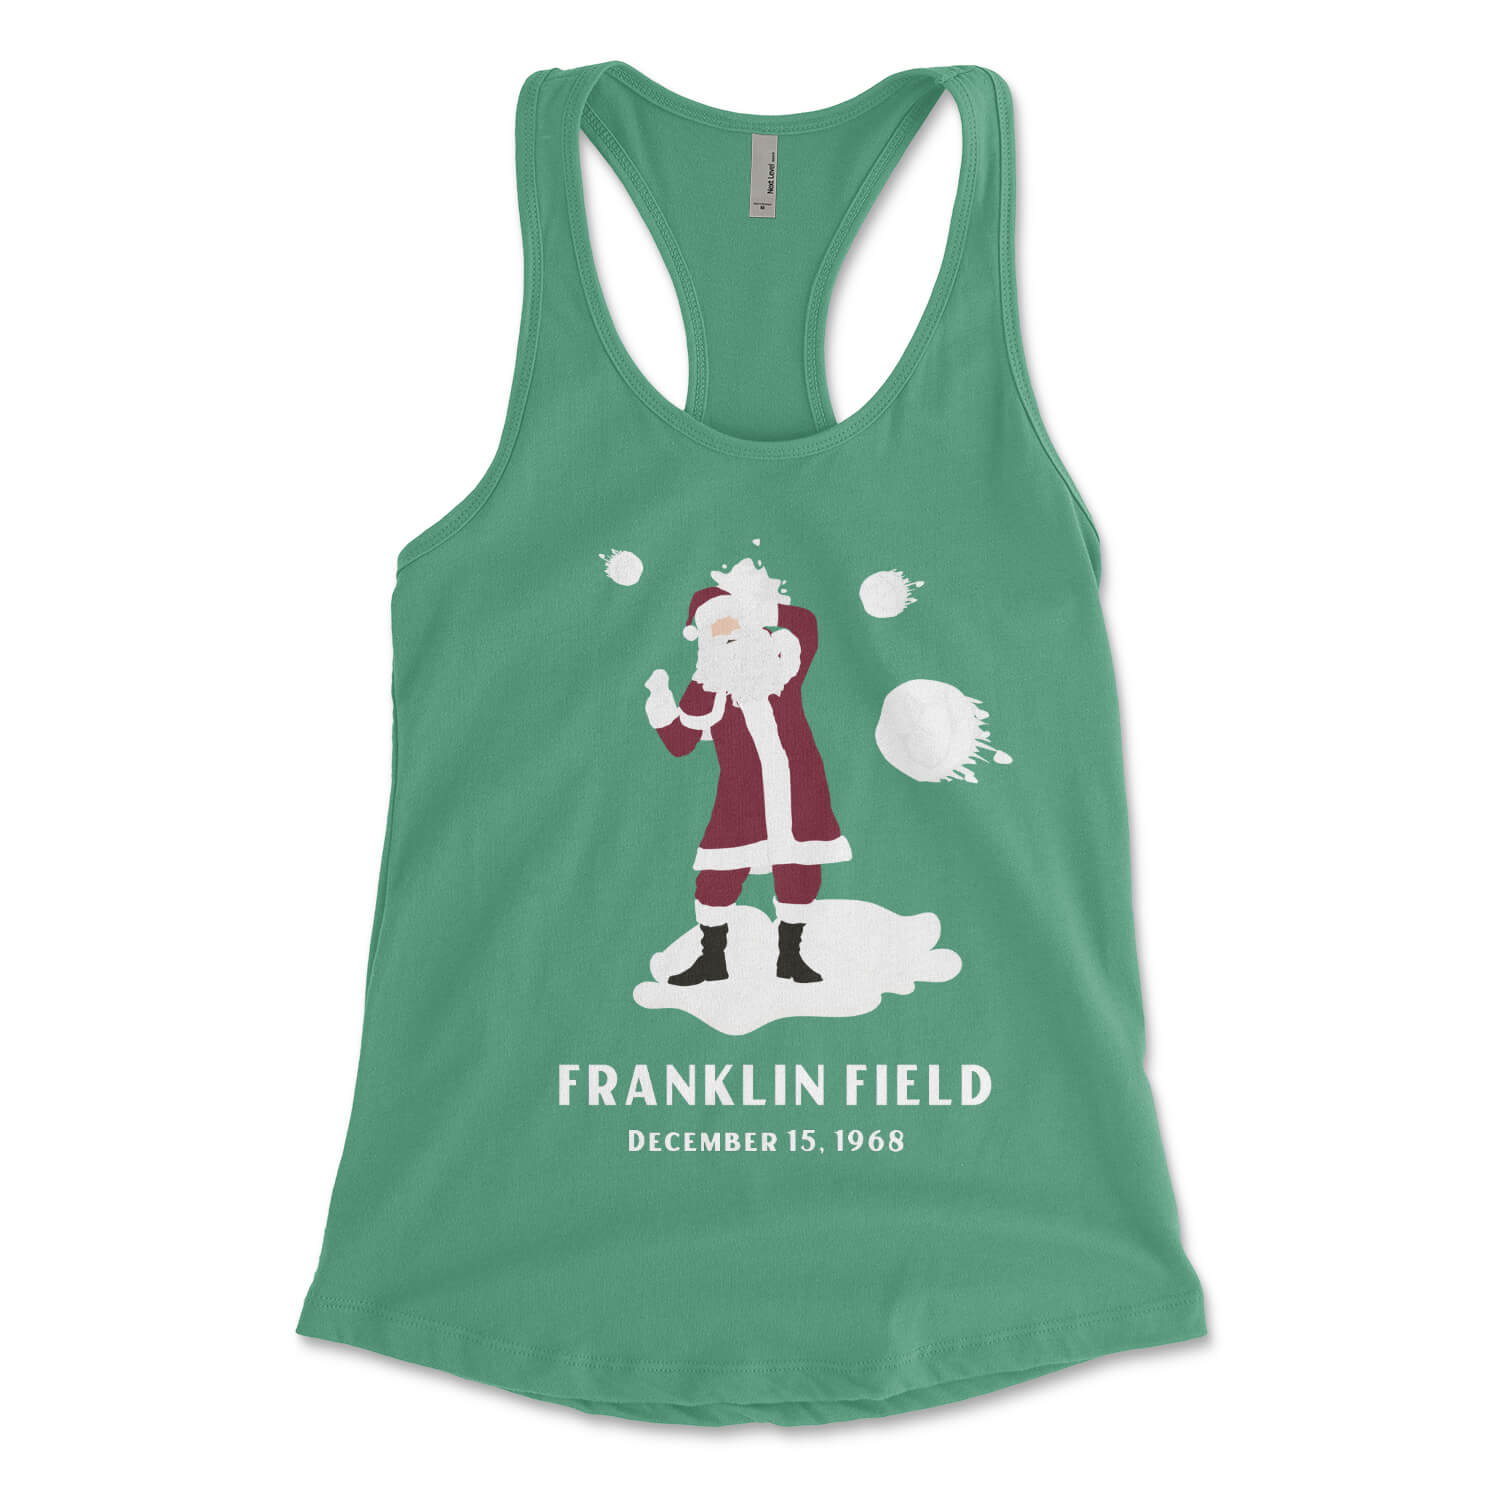 Philadelphia Eagles fans boo Santa Clause at Franklin Field kelly green womens racerback tank top from Phillygoat